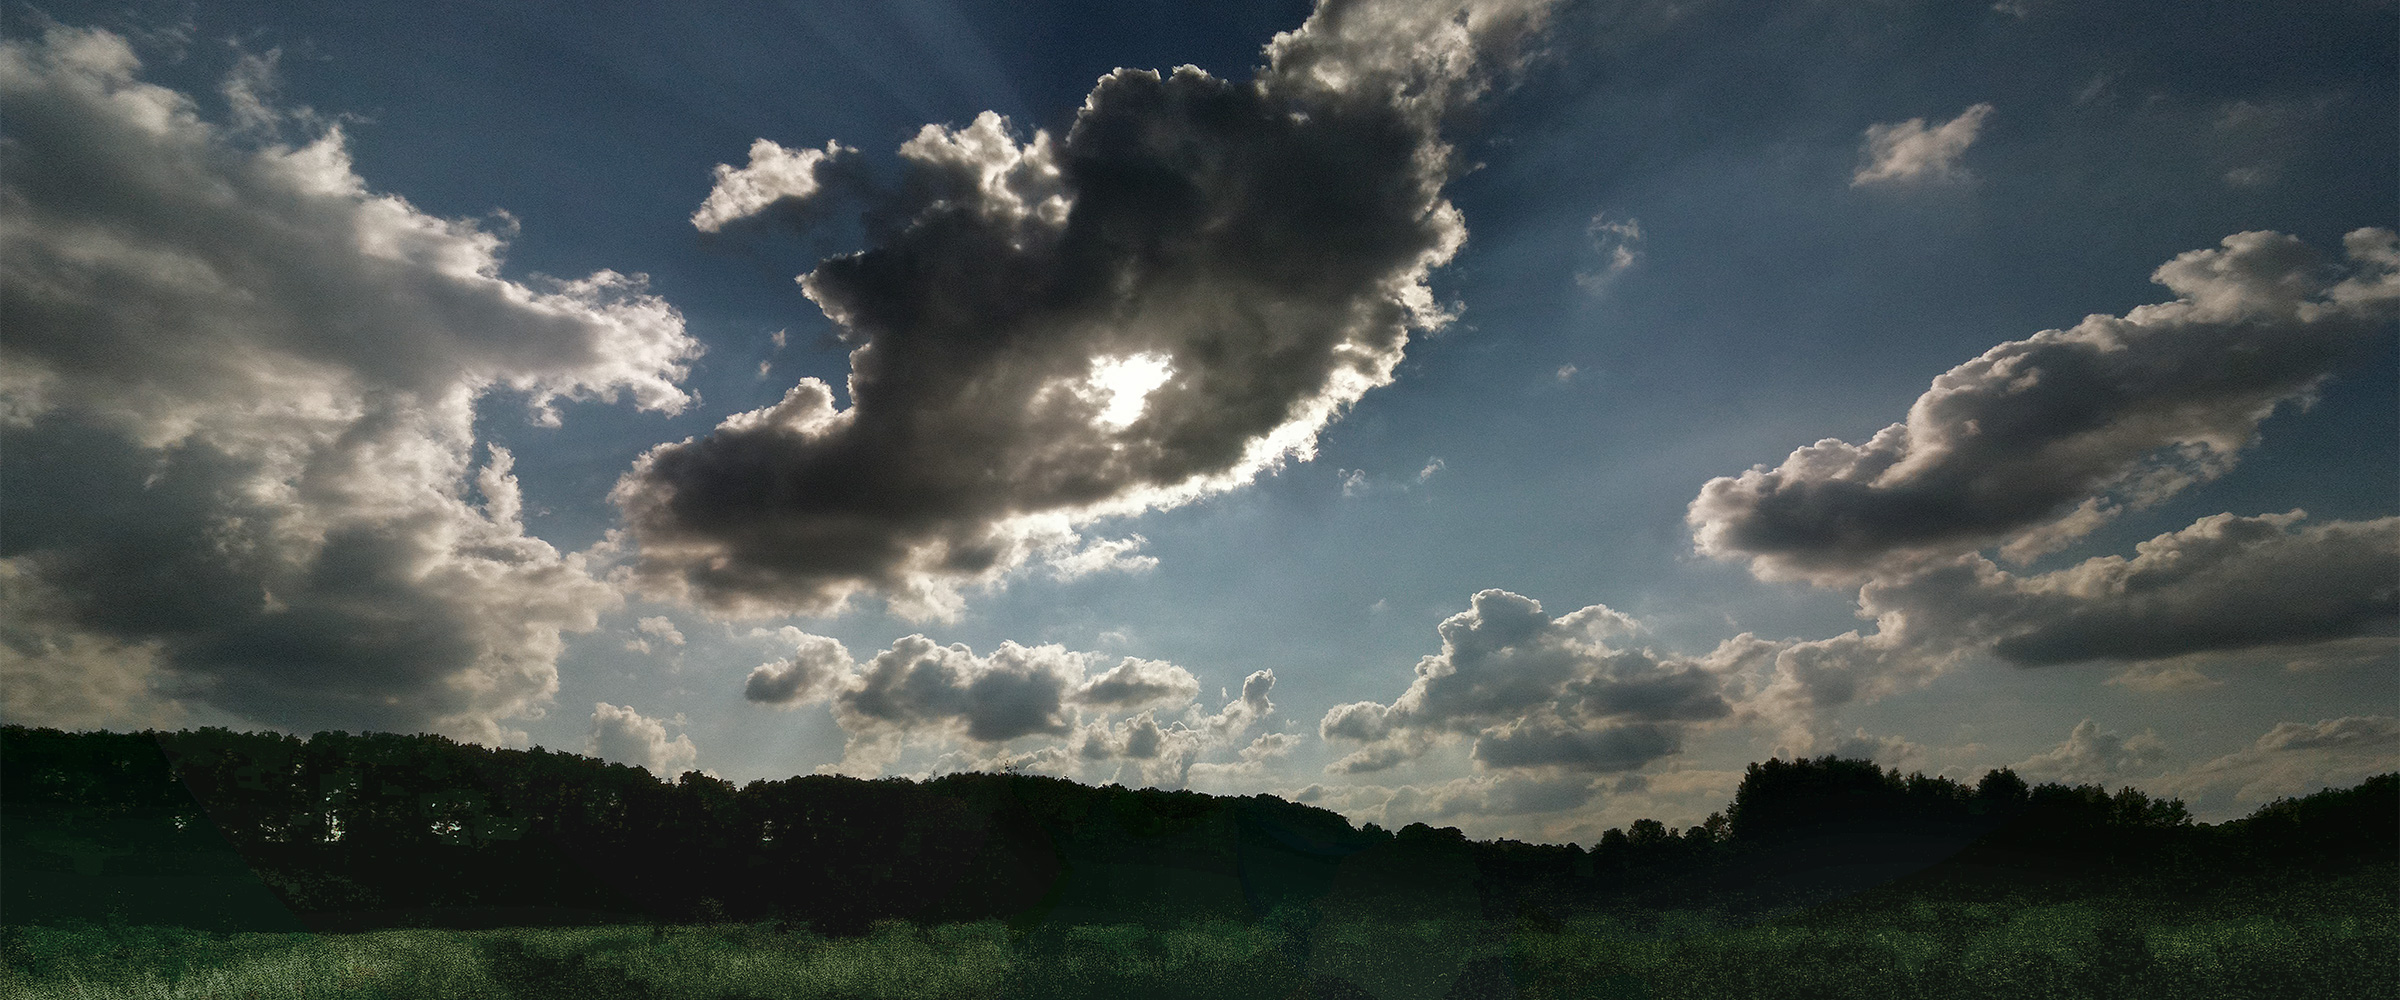 PANORAMA DIARY | Iphoneography blog | Fair weather clouds